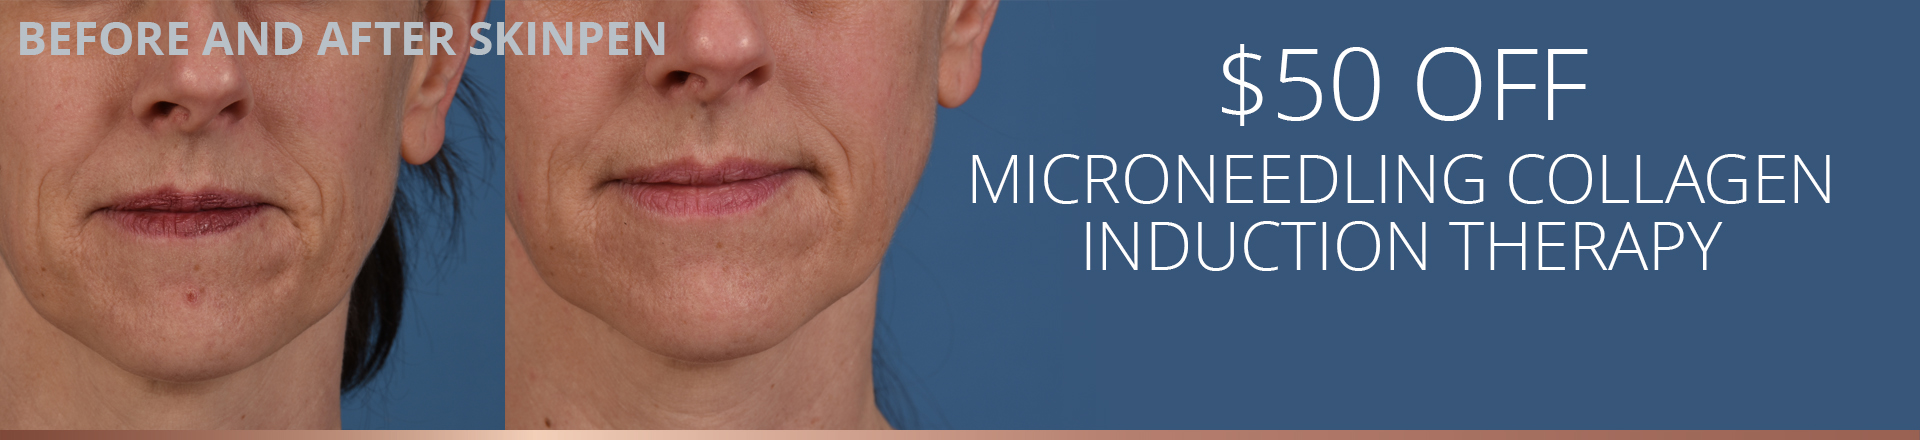 Microneedling Collagen Induction Therapy google special offer